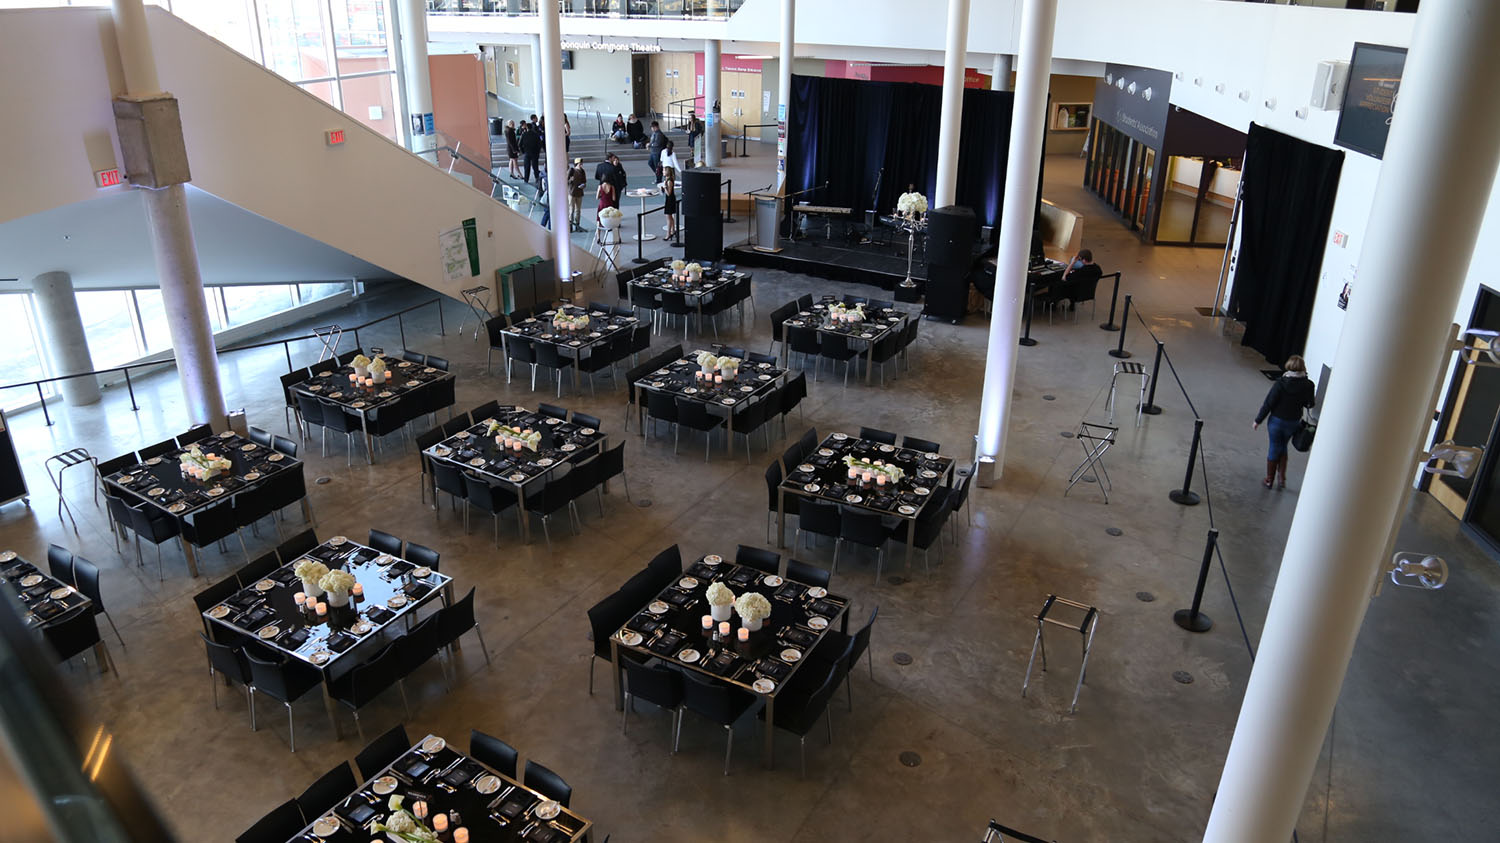 Gala layout, with stage, tables, and chairs.